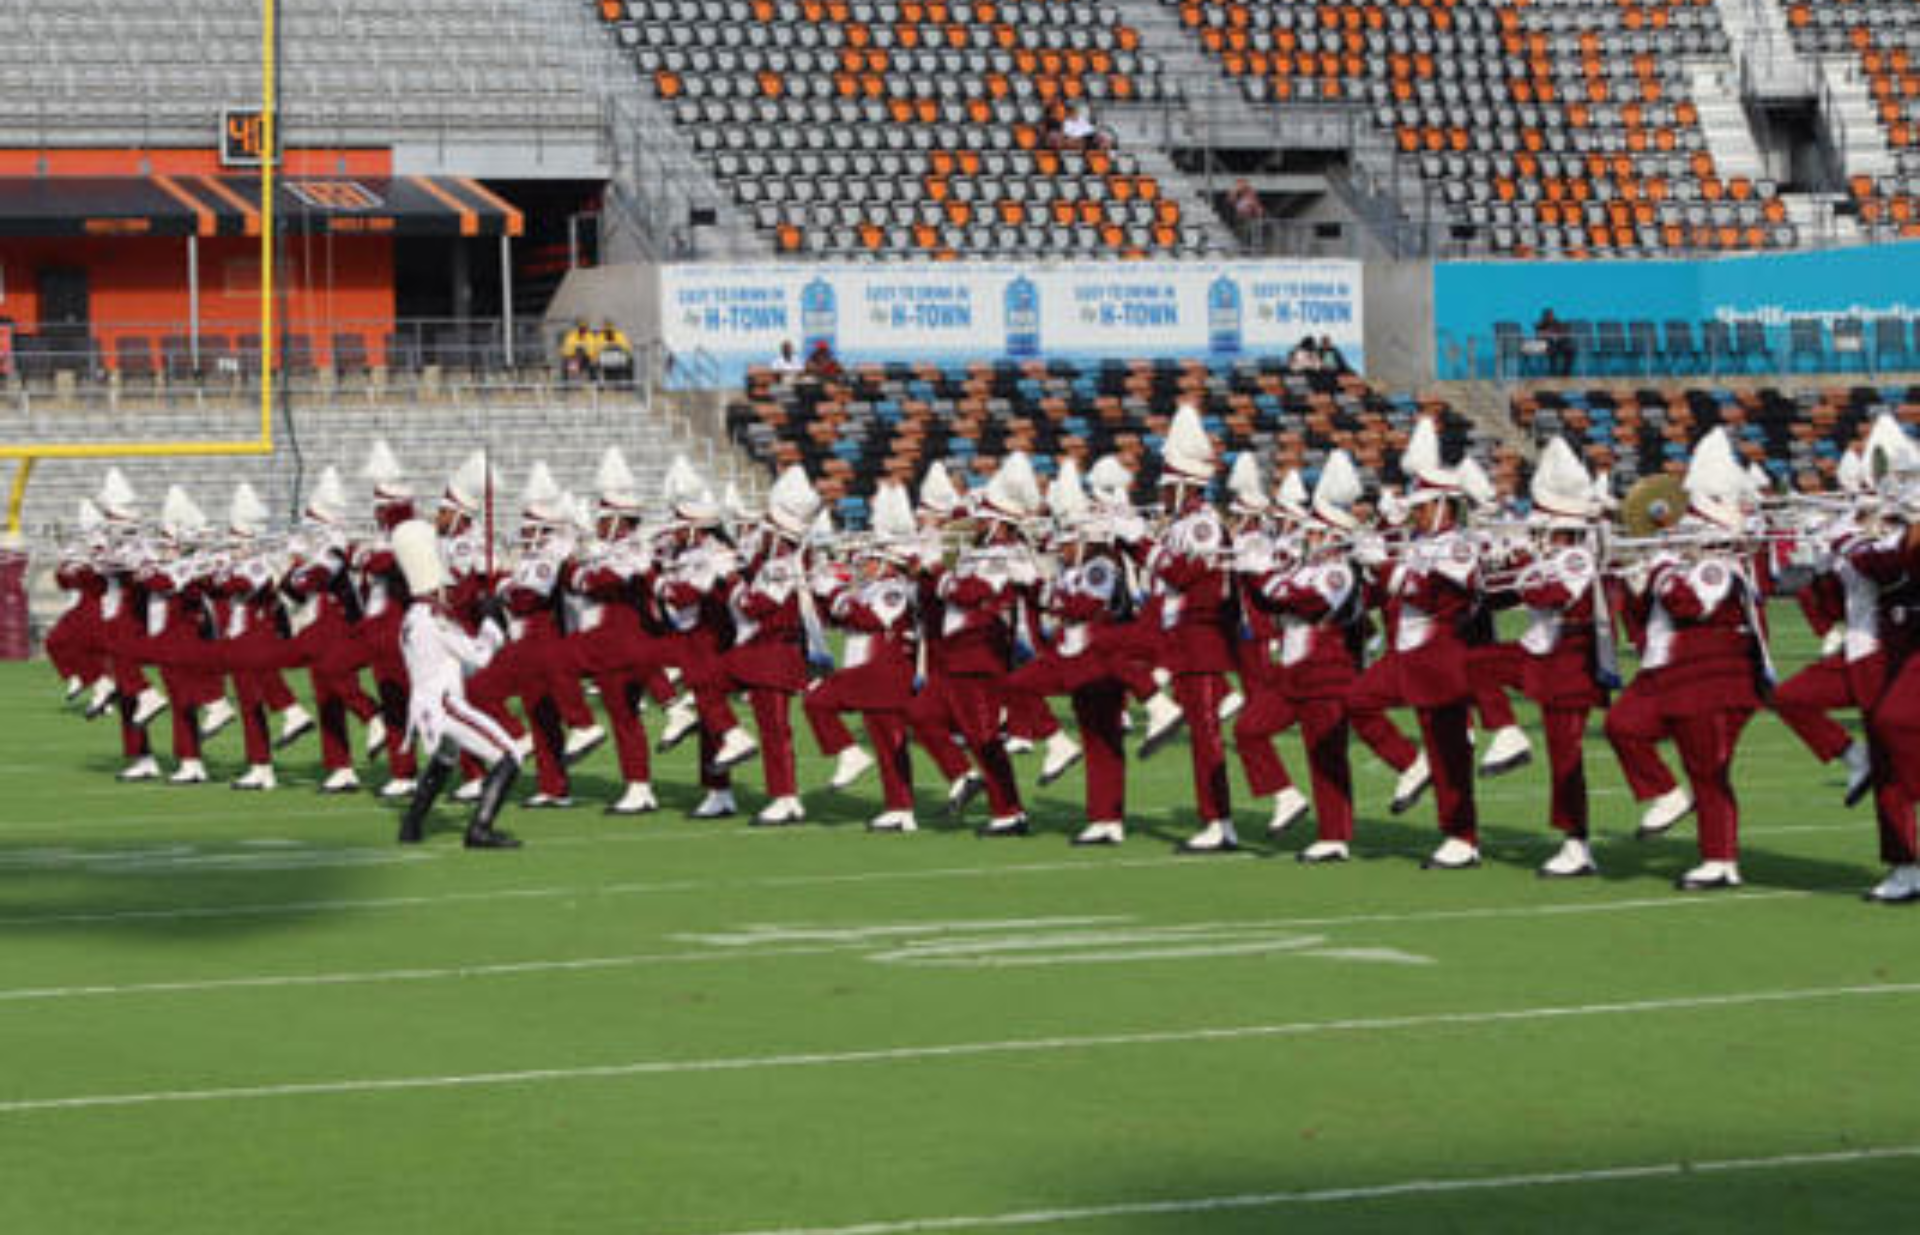 2023 HBCU Band of the Year National Championship Rankings